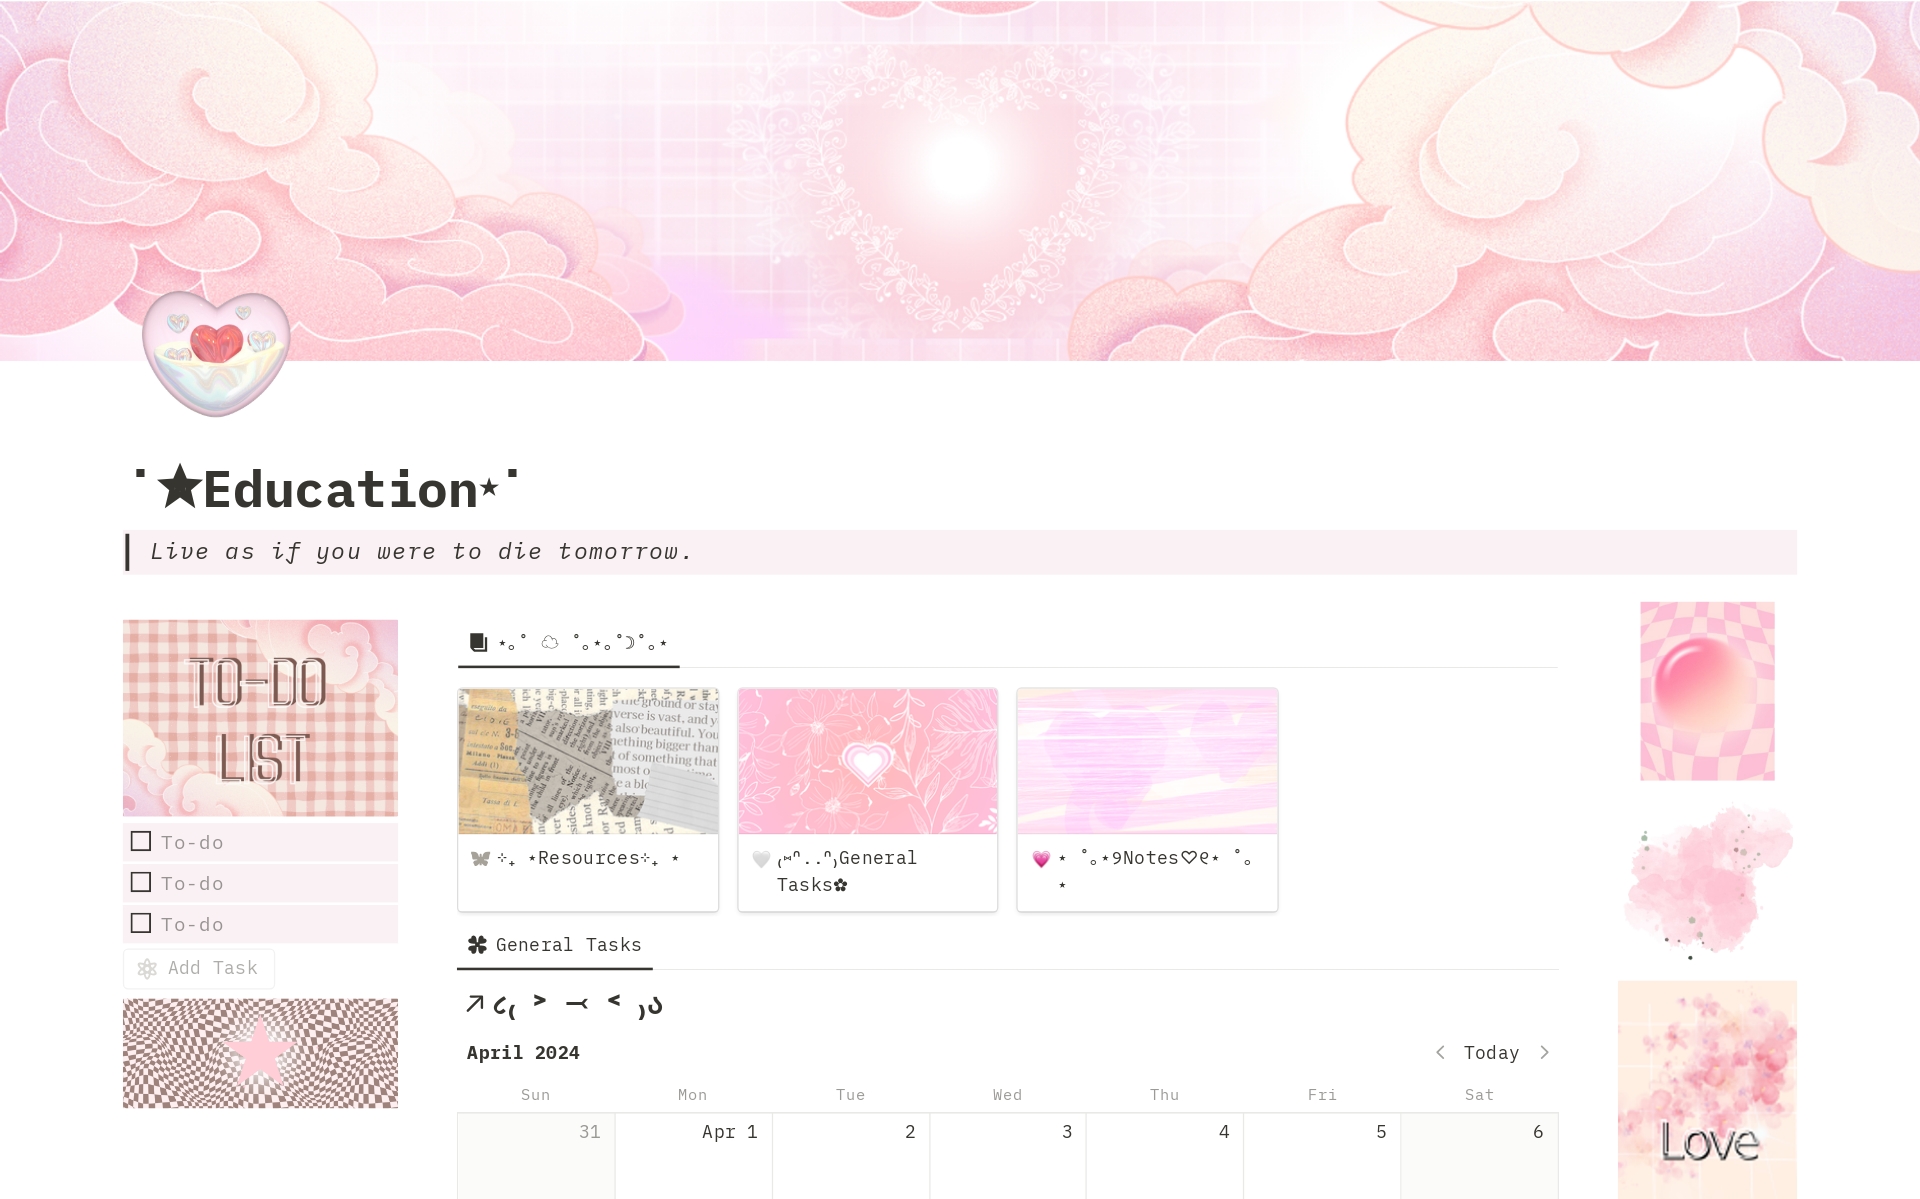 Here is soft and cute pink Notion Homepage. It includes Journaling page, Study Planner, To-do lists, Shopping lists, Watching and Reading lists. 